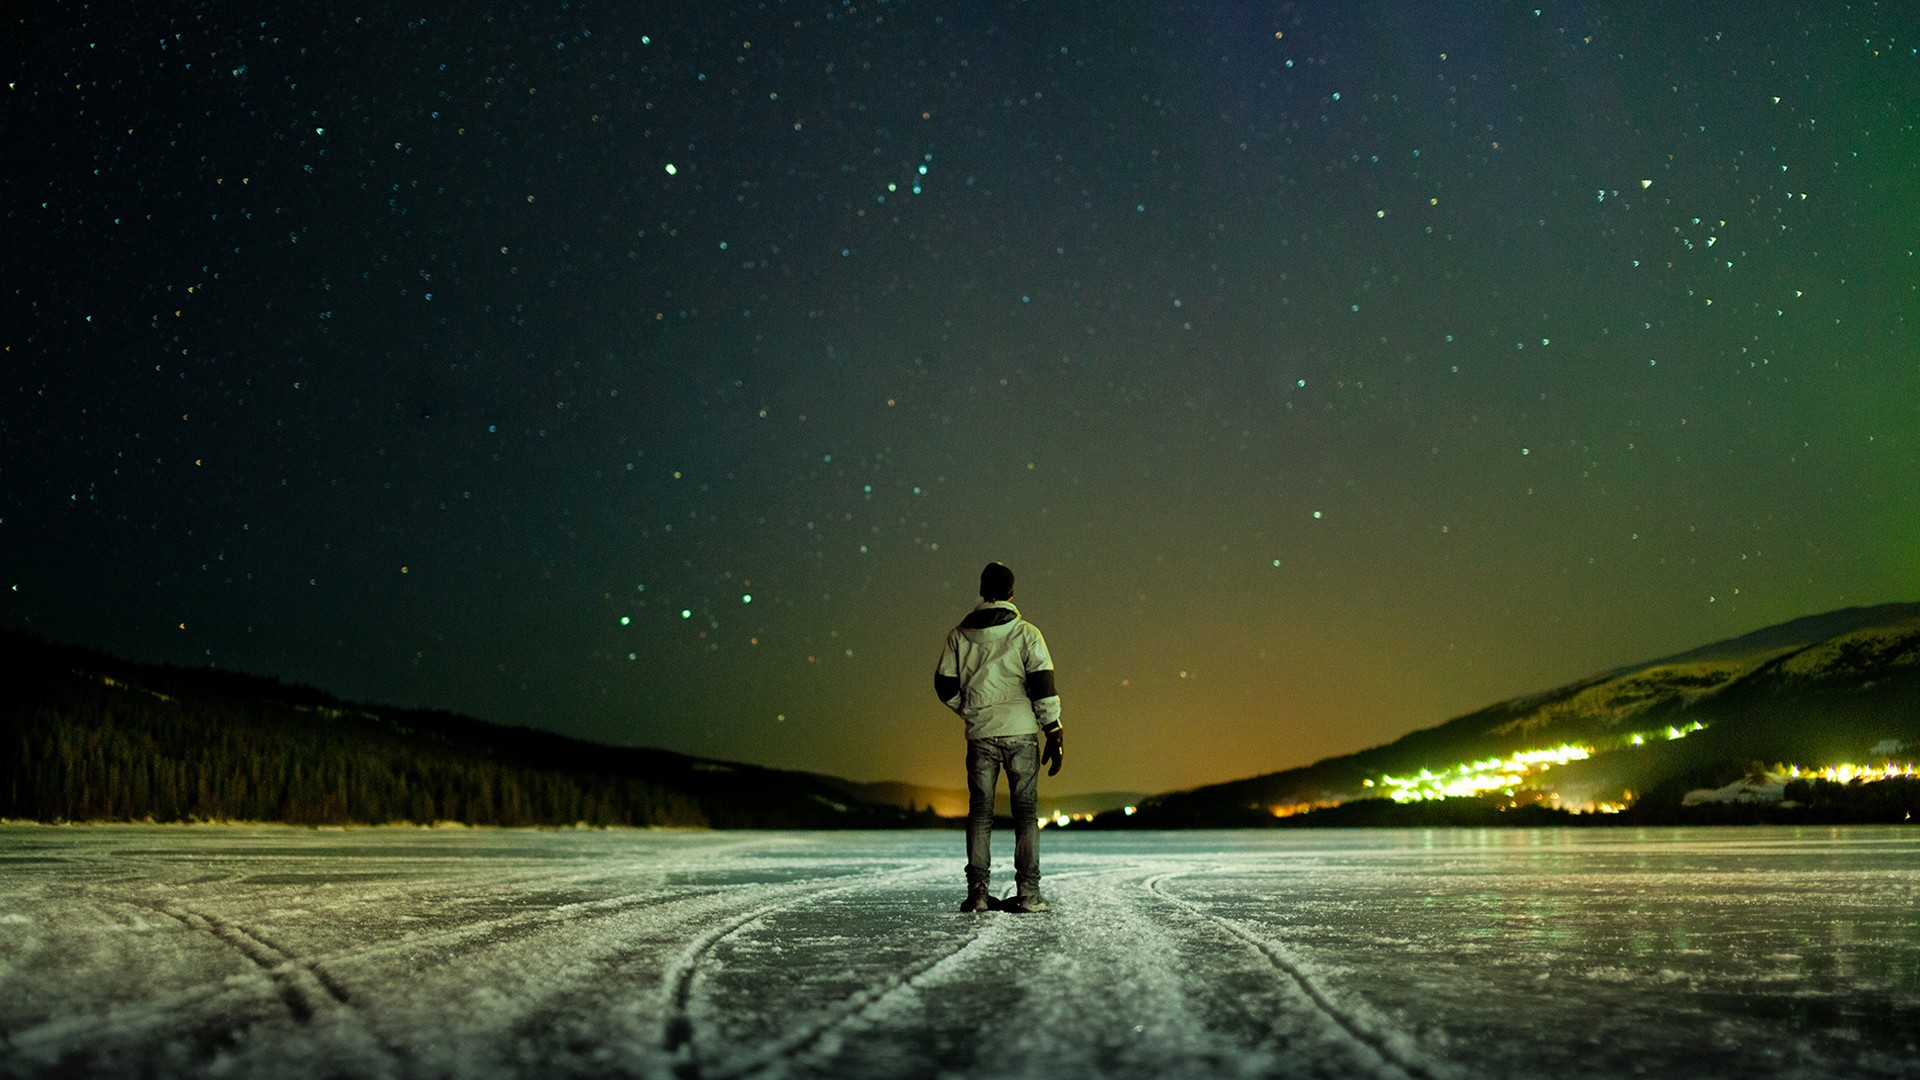 General 1920x1080 depth of field stars ice men outdoors sky cold outdoors winter landscape